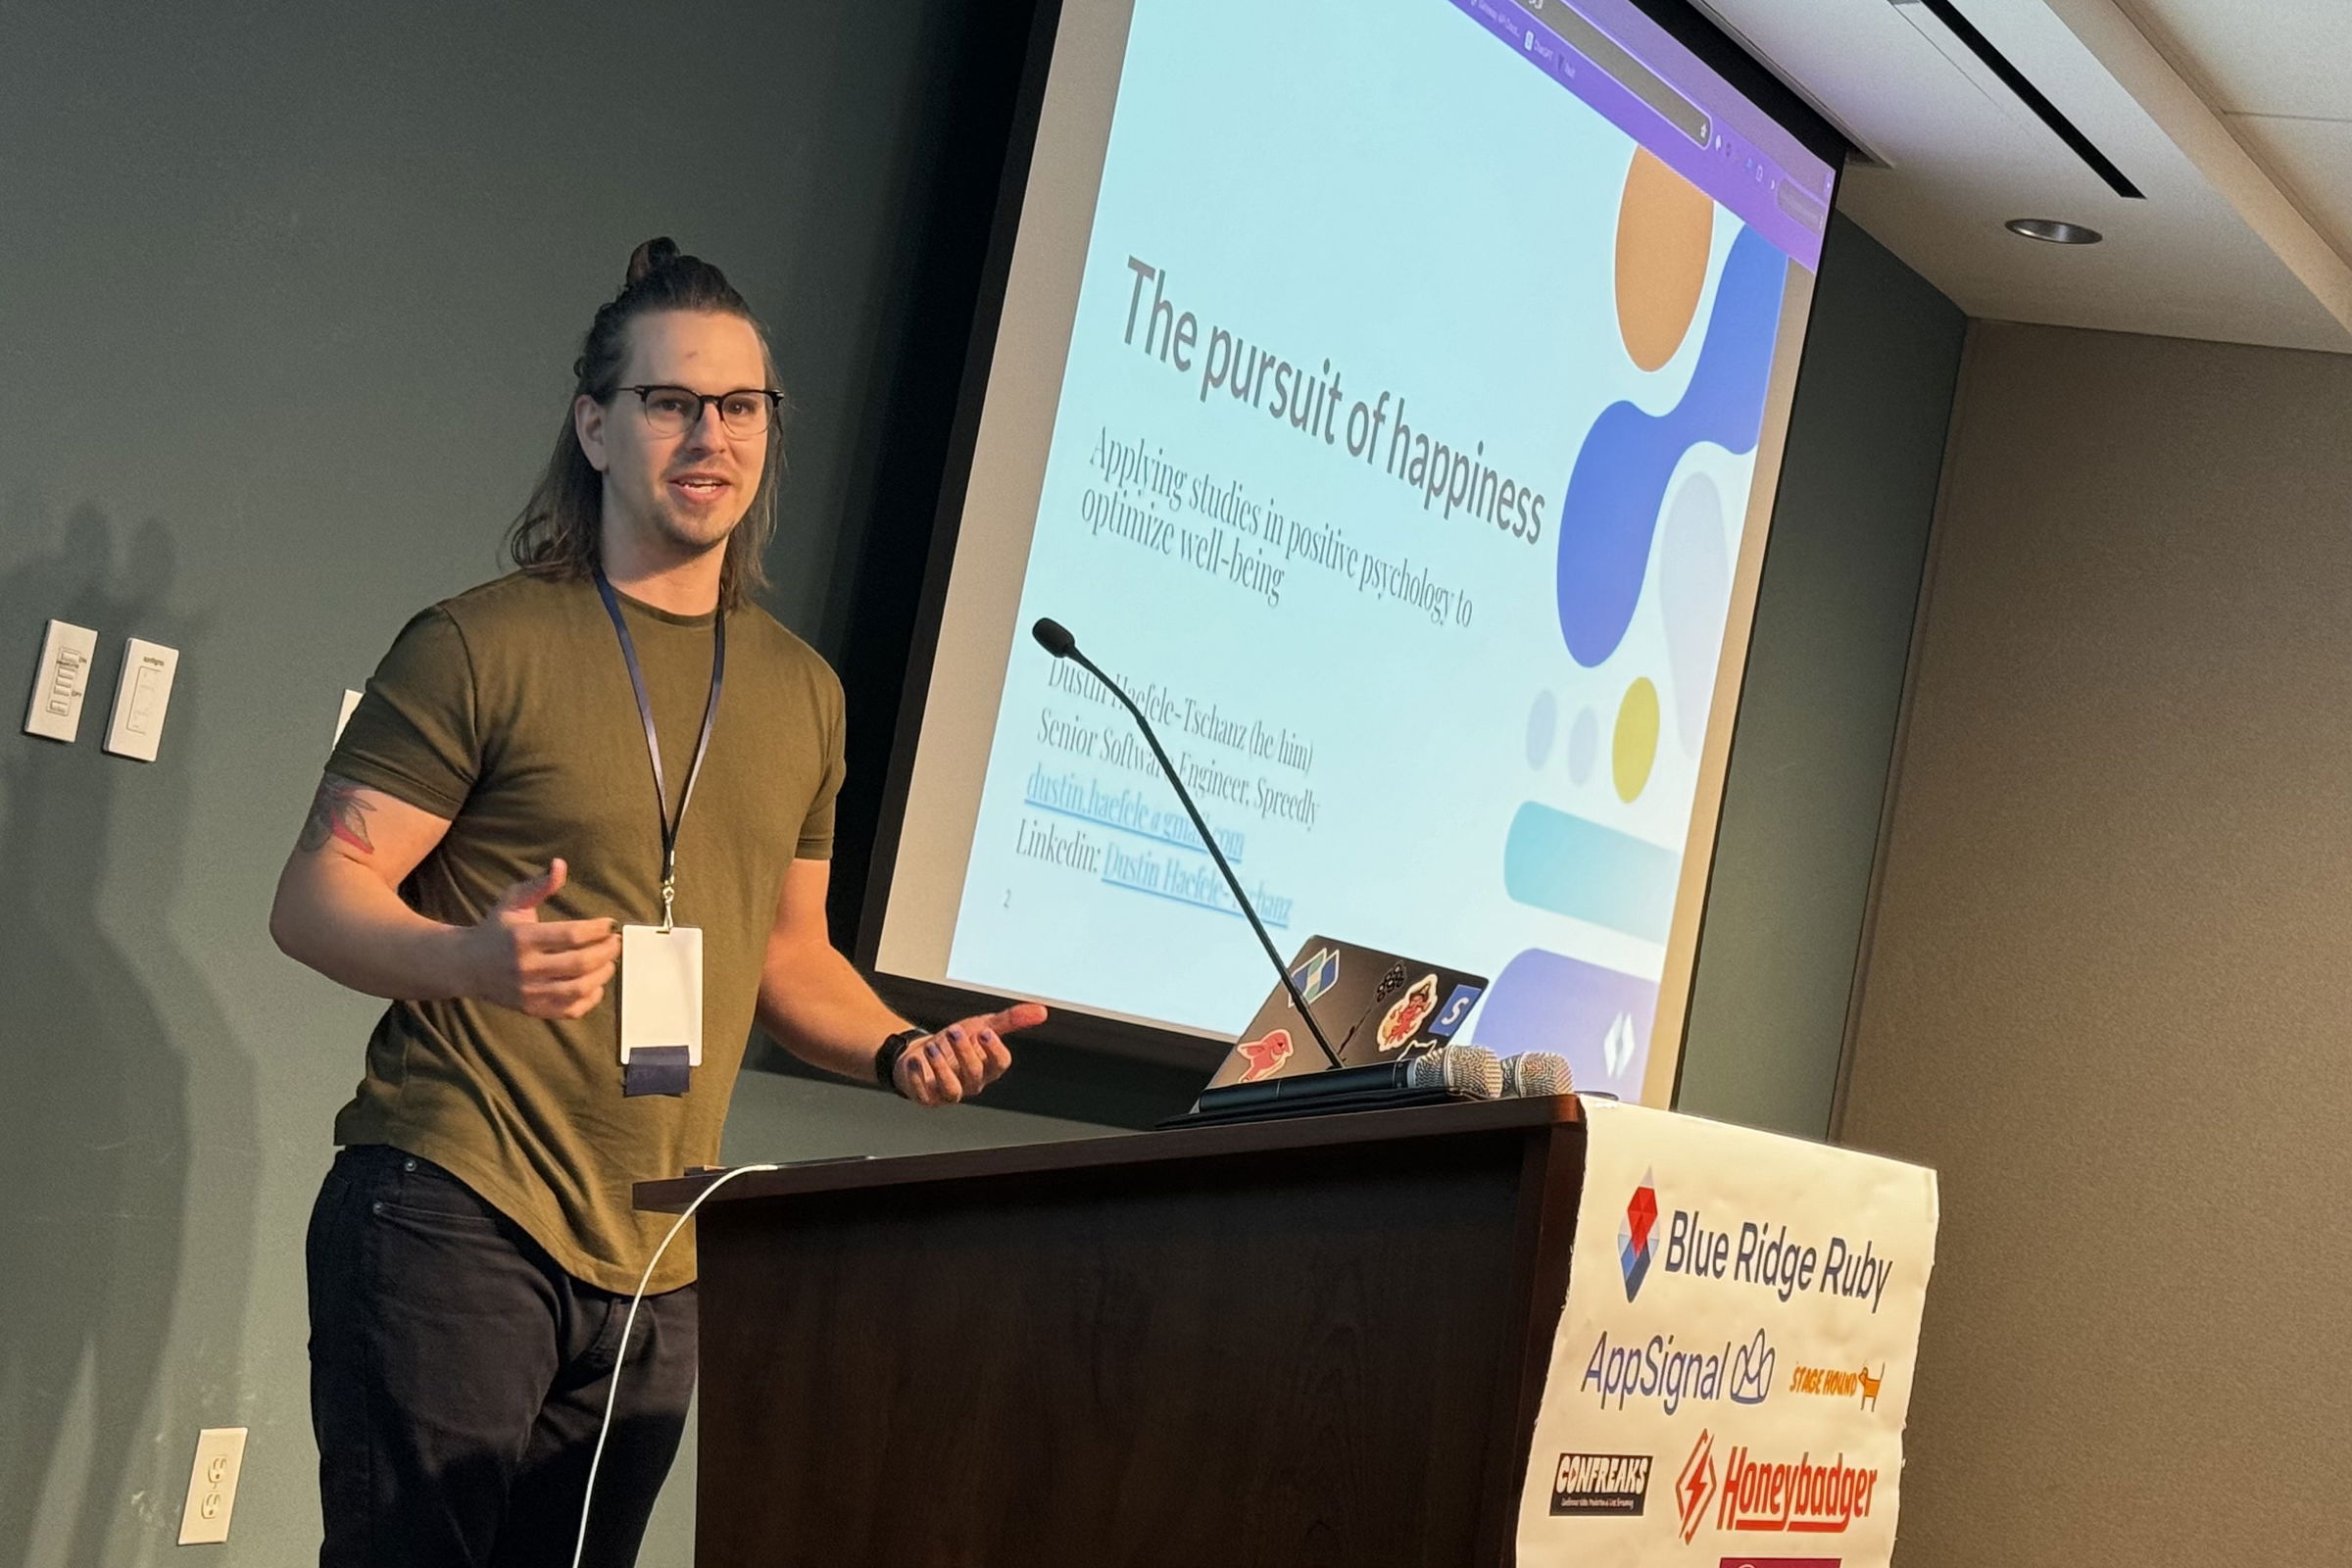 Dustin Haefele-Tschanz presents “The Pursuit of Happiness: Applying Studies in Positive Psychology to Optimize Well-being” at Blue Ridge Ruby conference, engaging the audience with a slide displayed behind him, featuring his contact information and professional title.